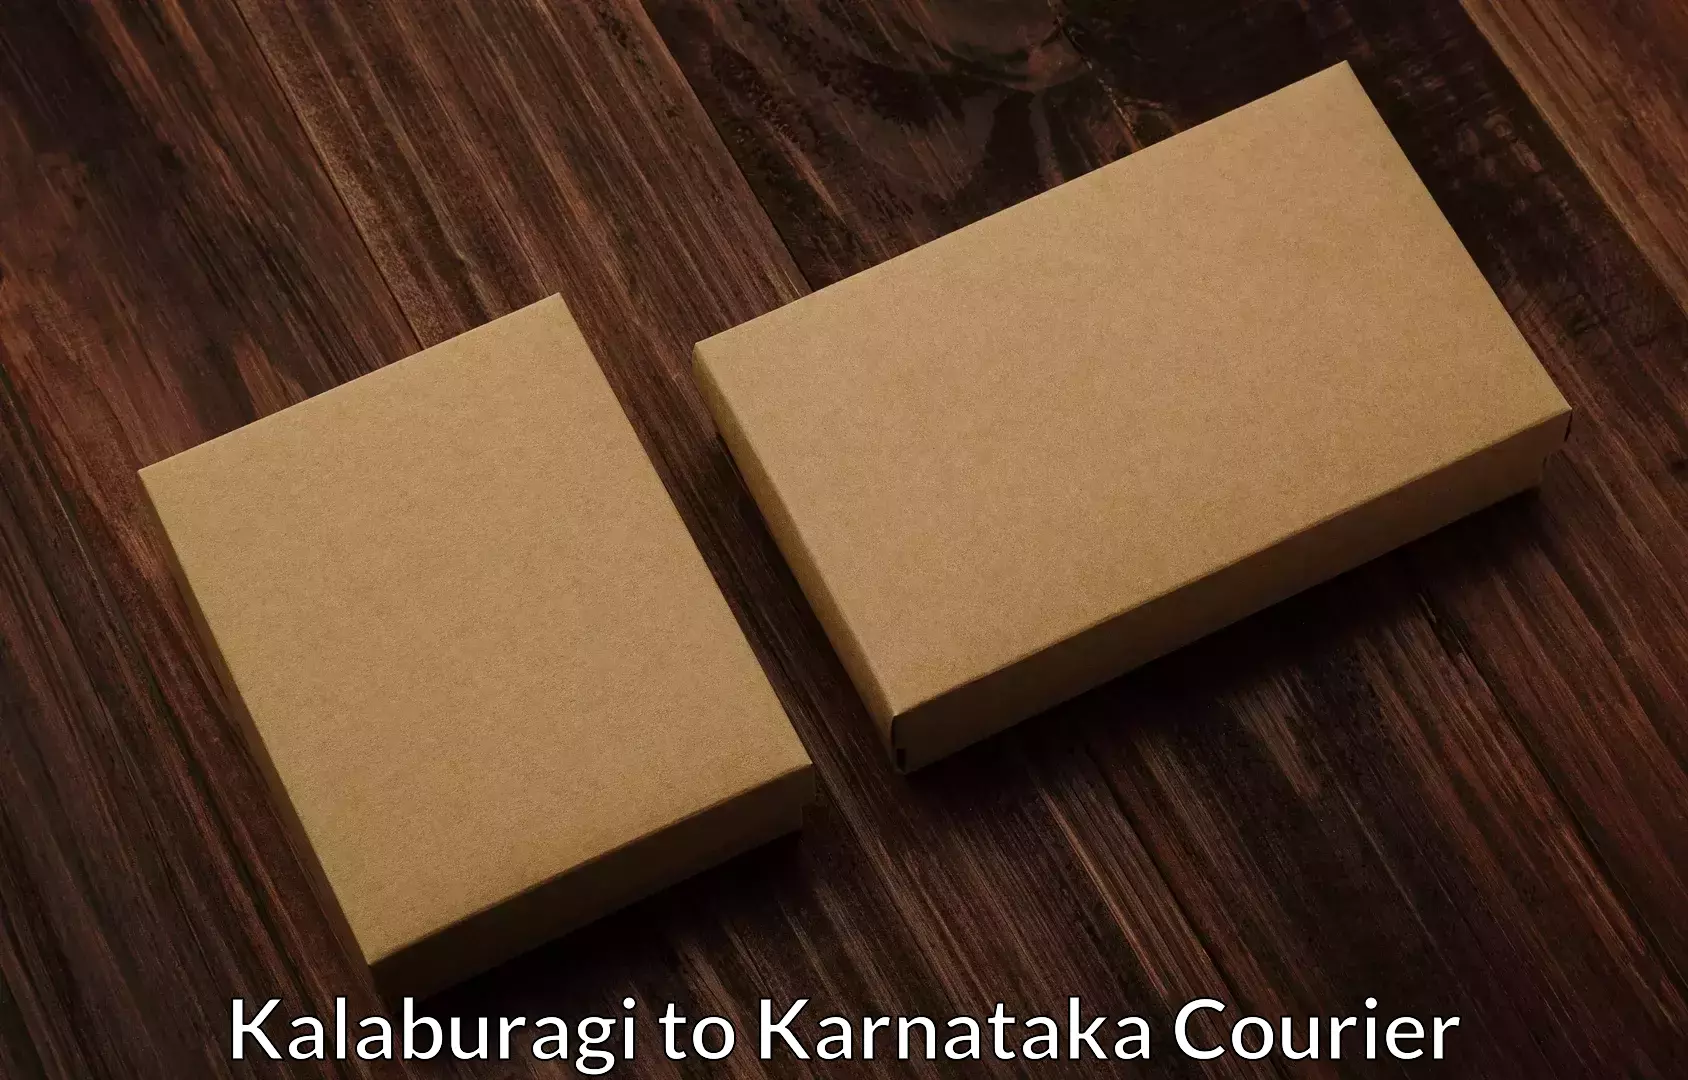 Furniture delivery service Kalaburagi to Chikmagalur